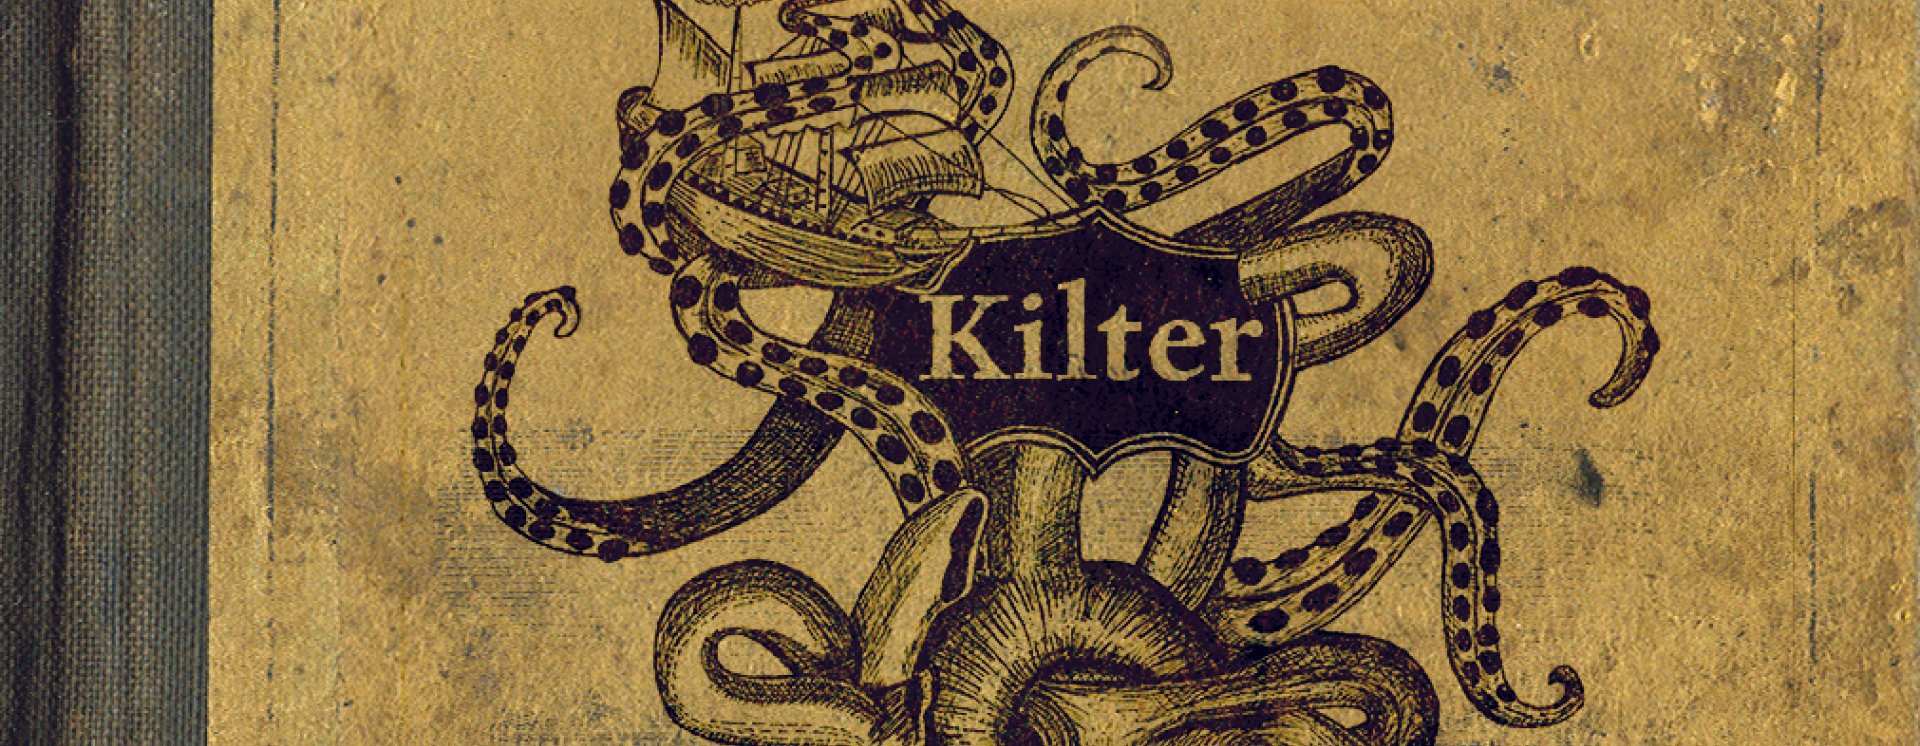 1416336500 kilter front cover copy